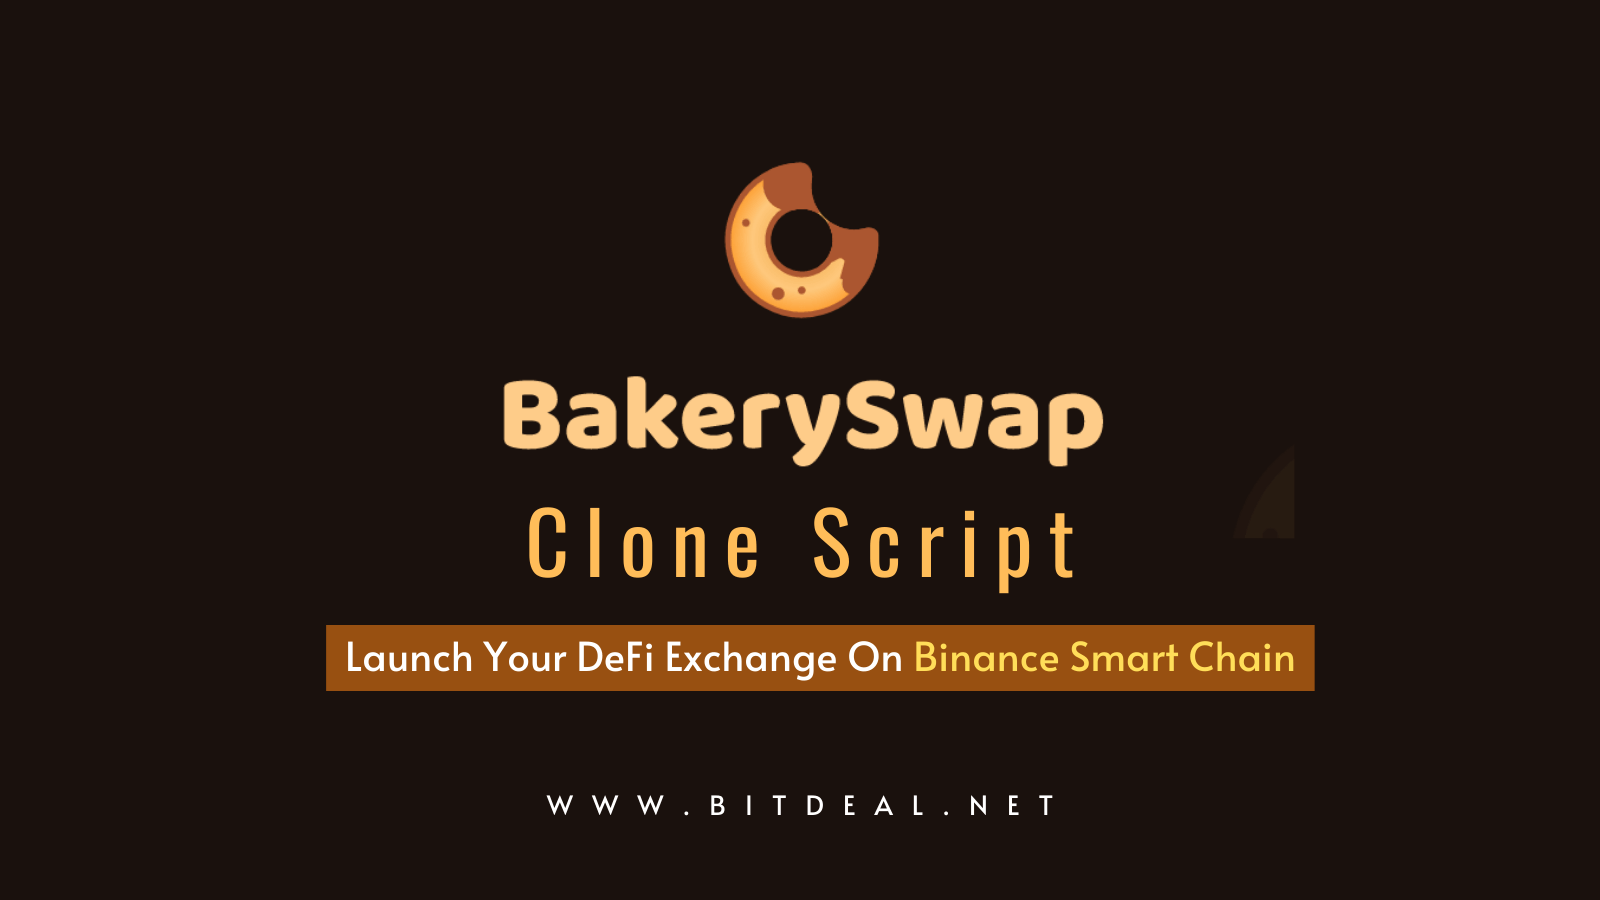 Bakeryswap Clone Script To Launch Your Own DeFi based Exchange